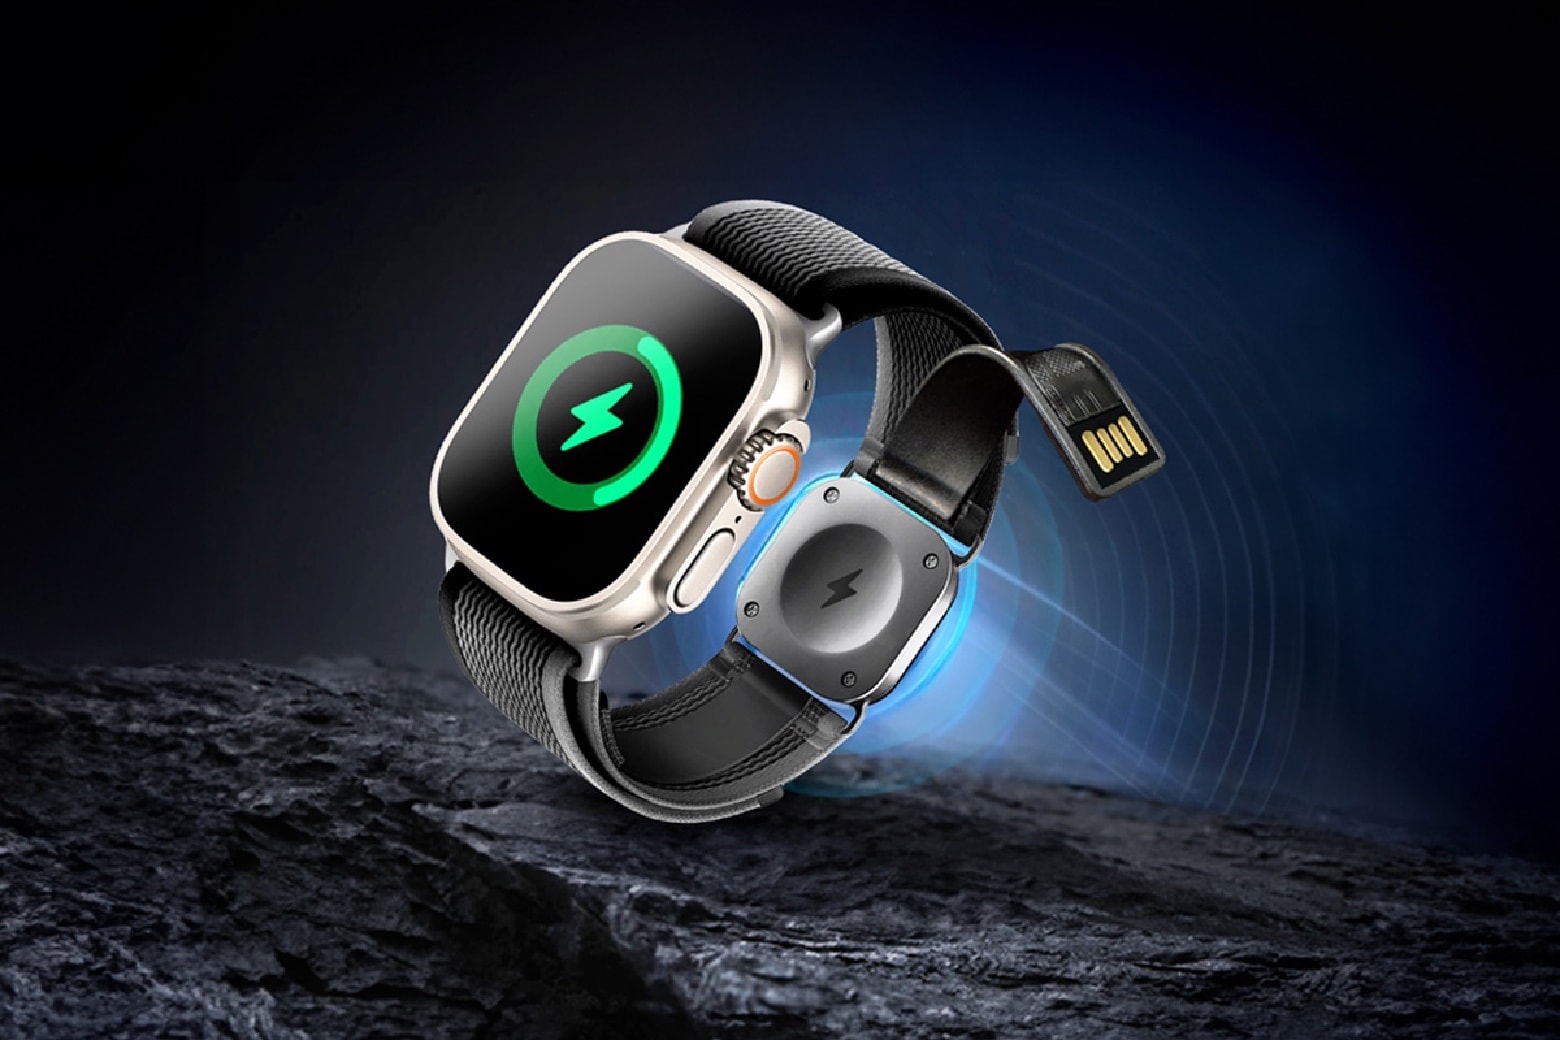 This Apple Watch band’s secret weapon is a concealed wireless charger